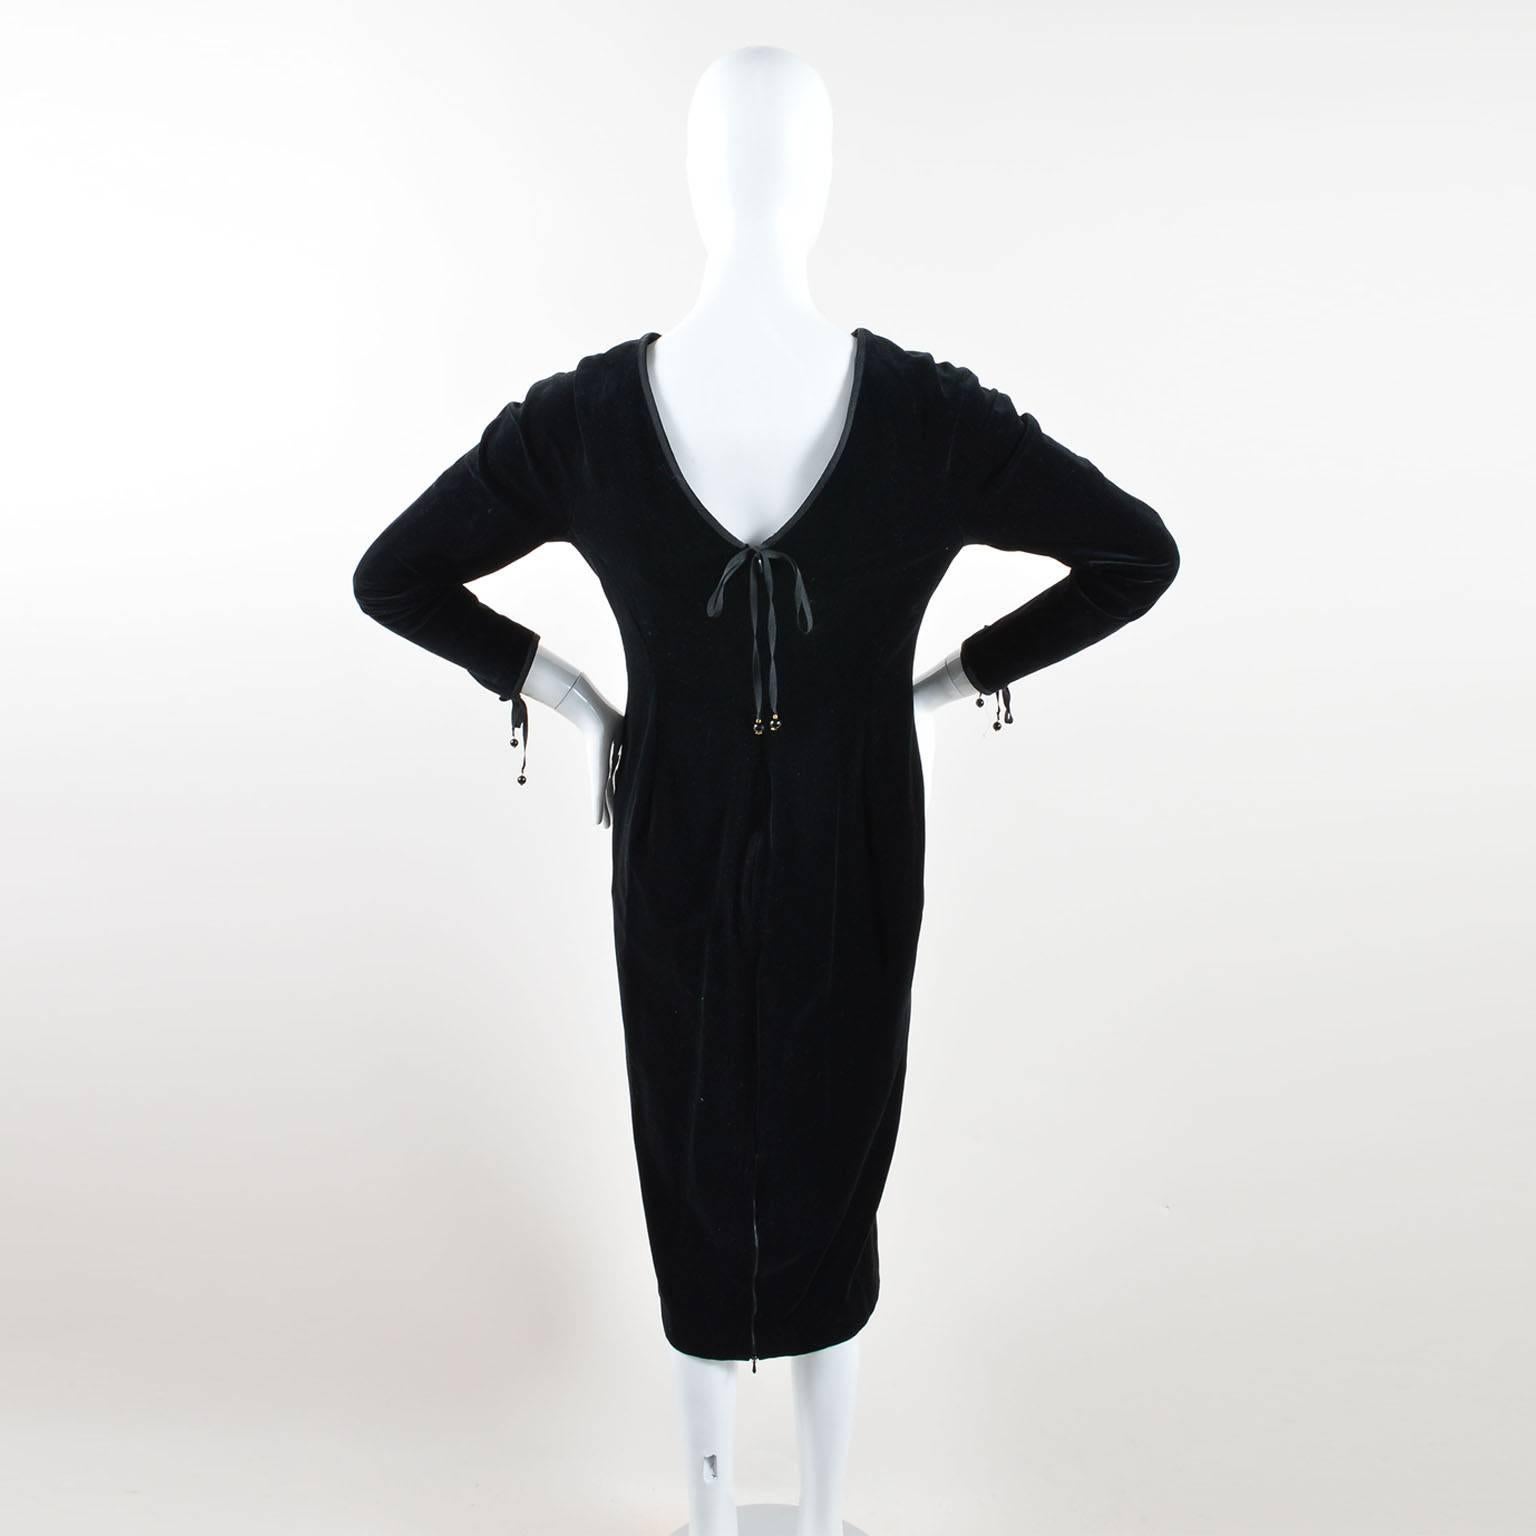 New with tags. Soft black velvet sheath dress. Black grosgrain ribbon trim at neckline and wrists; ribbon trim extends into ties with small round 'CC' logo beads. Midi-length. Long fitted sleeves. Rounded neckline, v-back. Two front hip patch